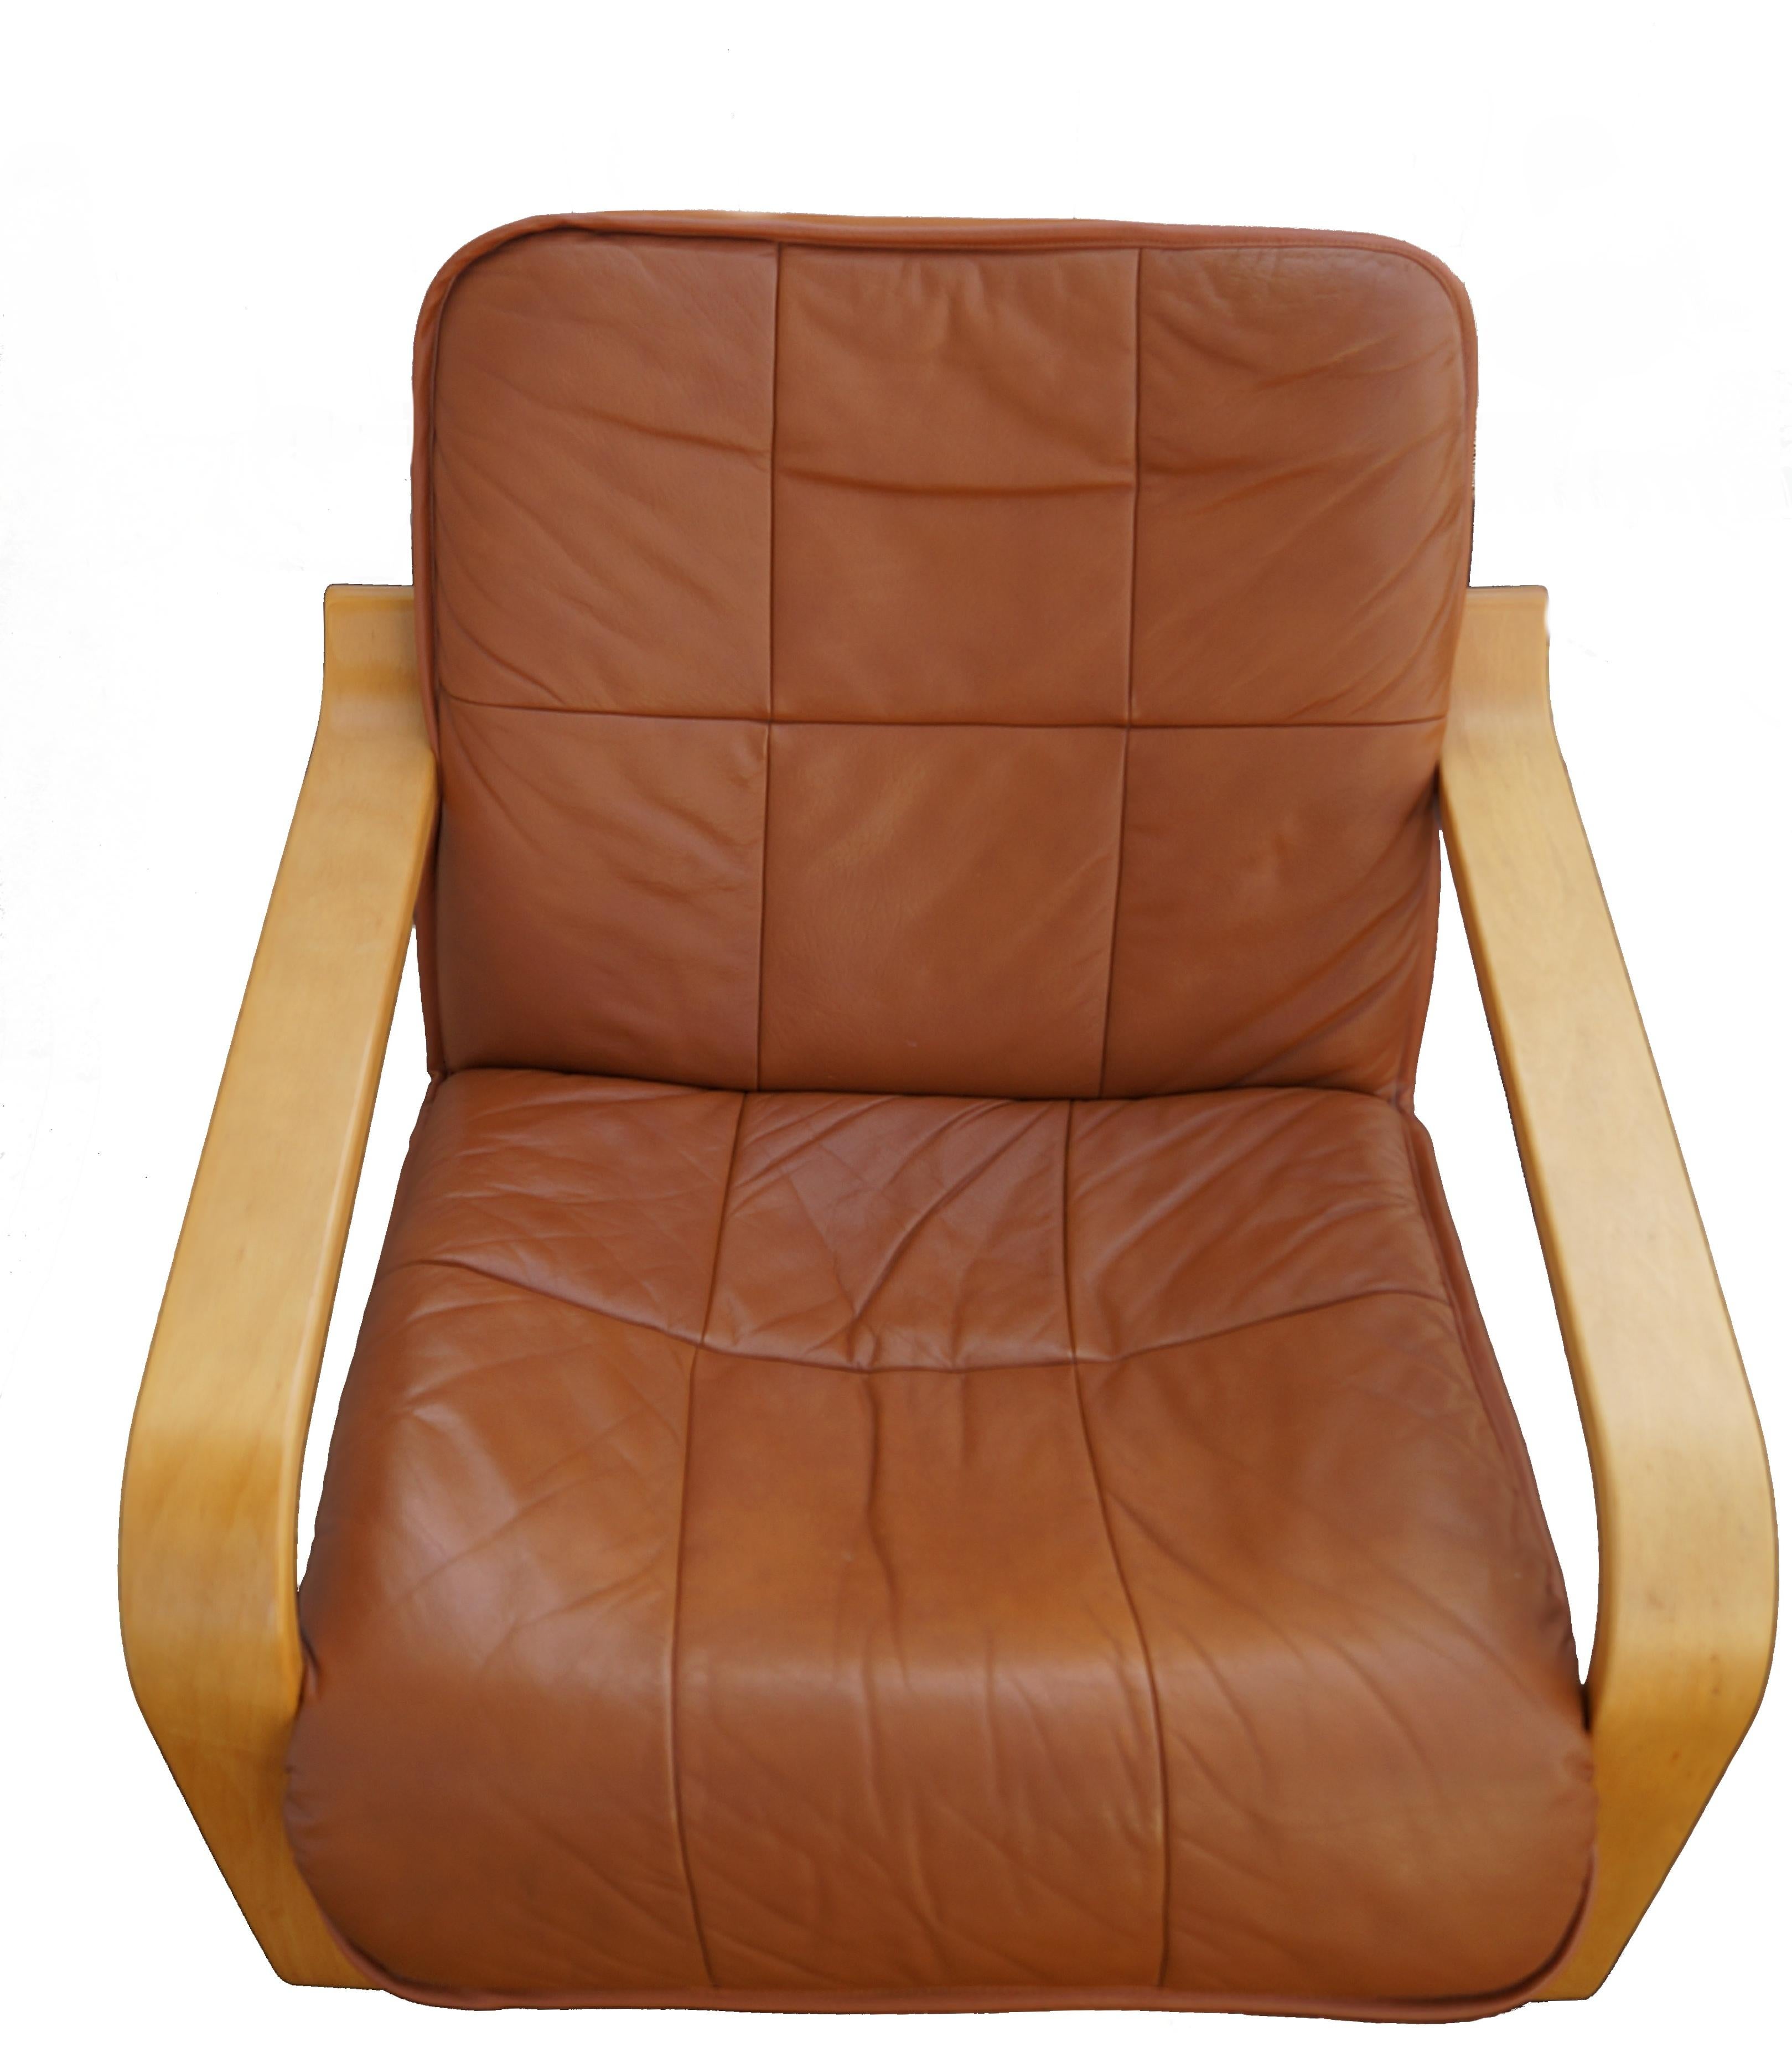 Leather Lounge Chair & Ottoman Set Mid-Century Modern OY BJ Dahlqvist AB Finland In Good Condition For Sale In Wayne, NJ